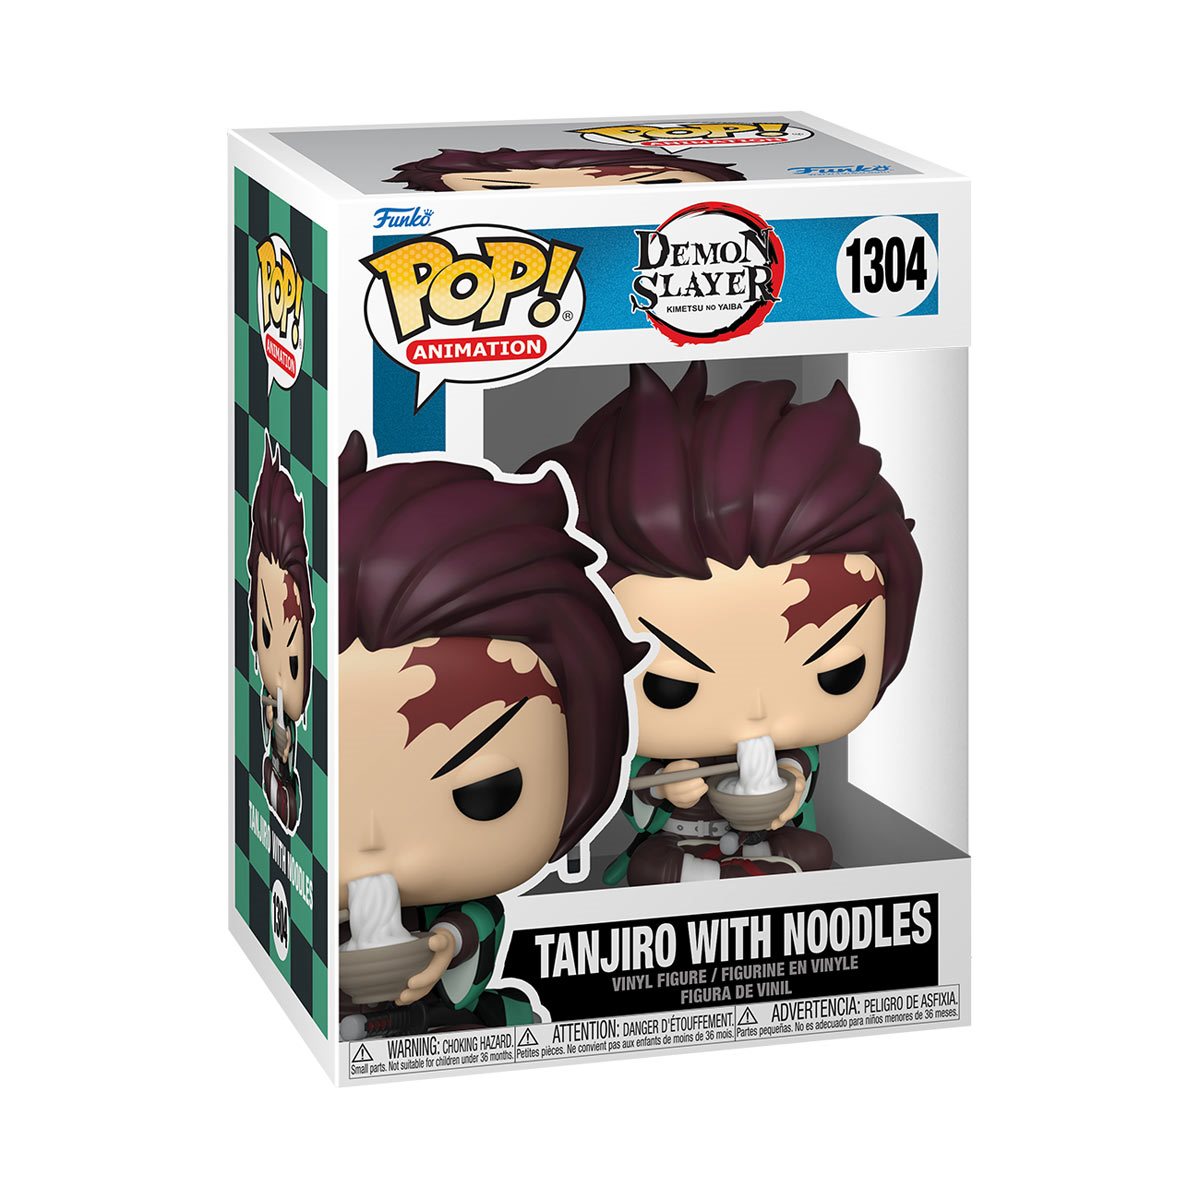 Tanjiro with Noodles Demon Slayer Pop!